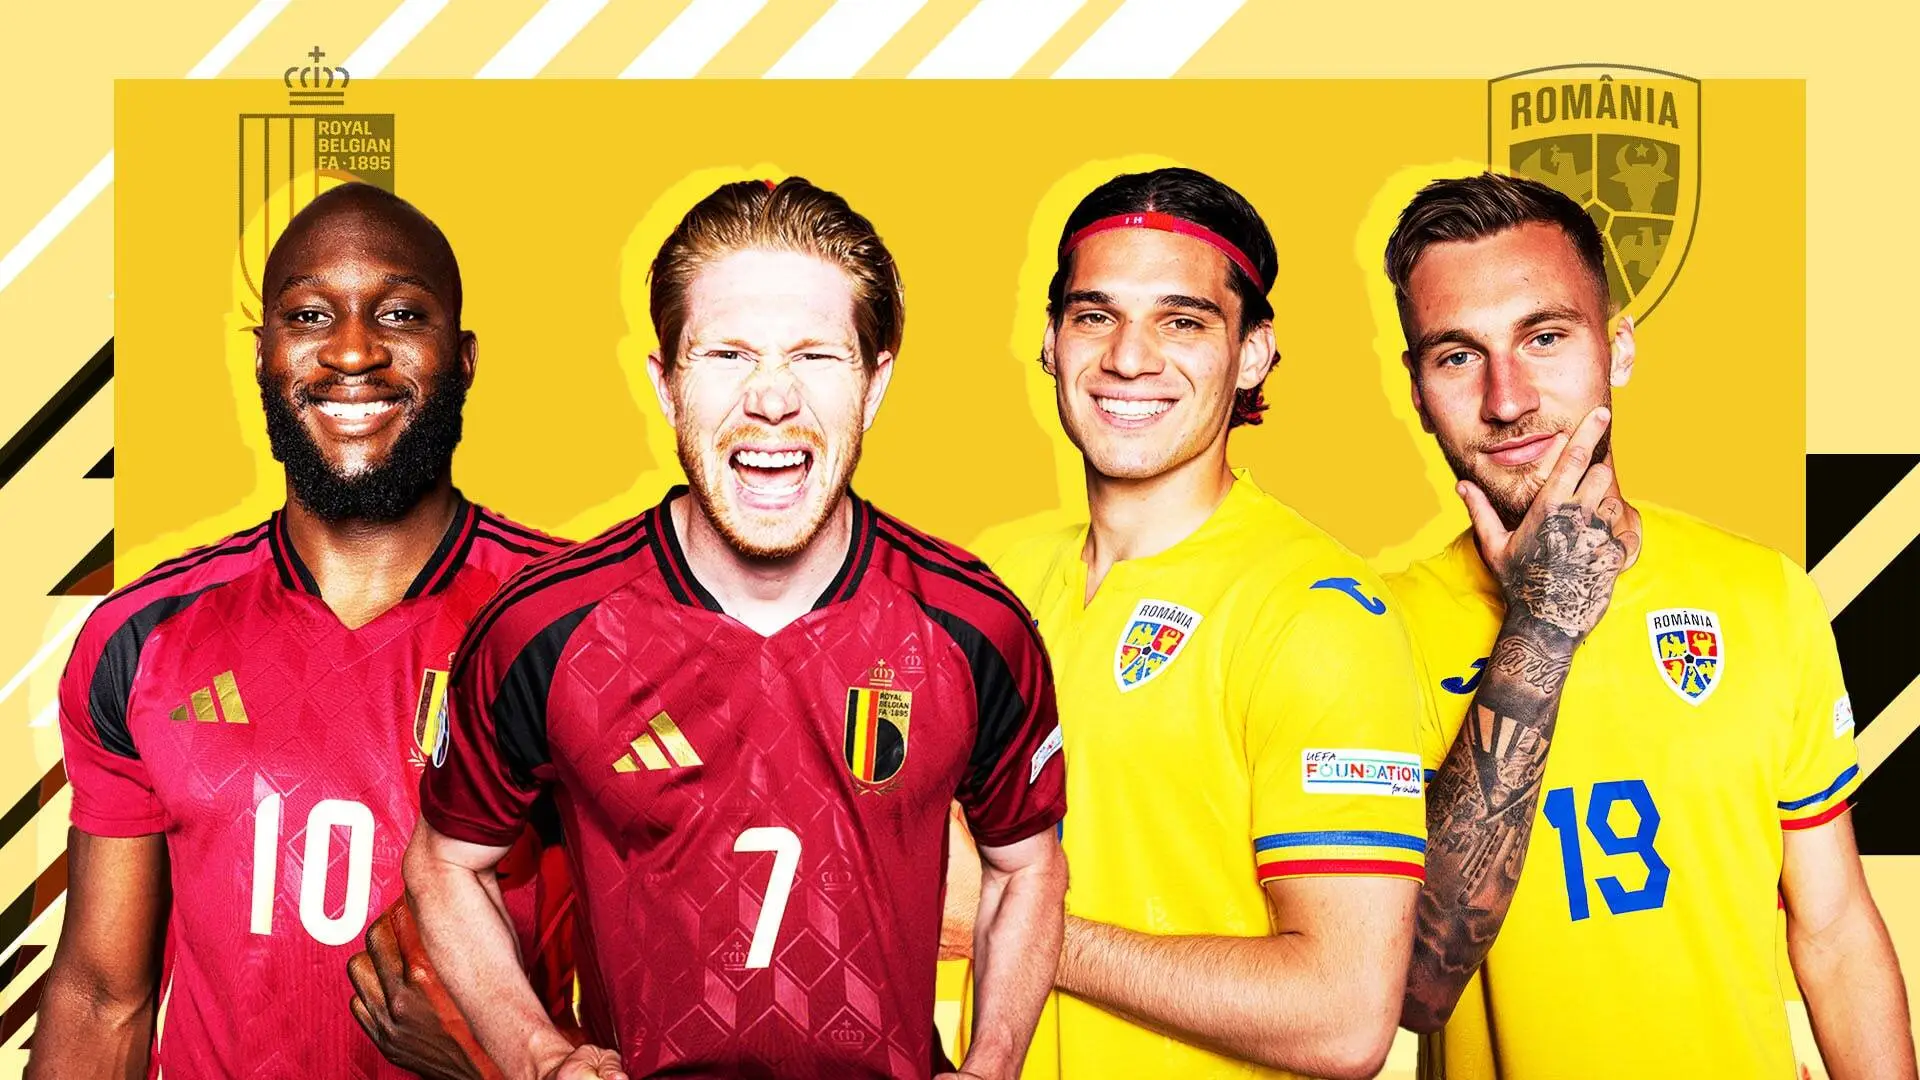 Belgium - Romania Match Live: Where to Watch on TV and Streaming? Broadcast Schedules - Media7